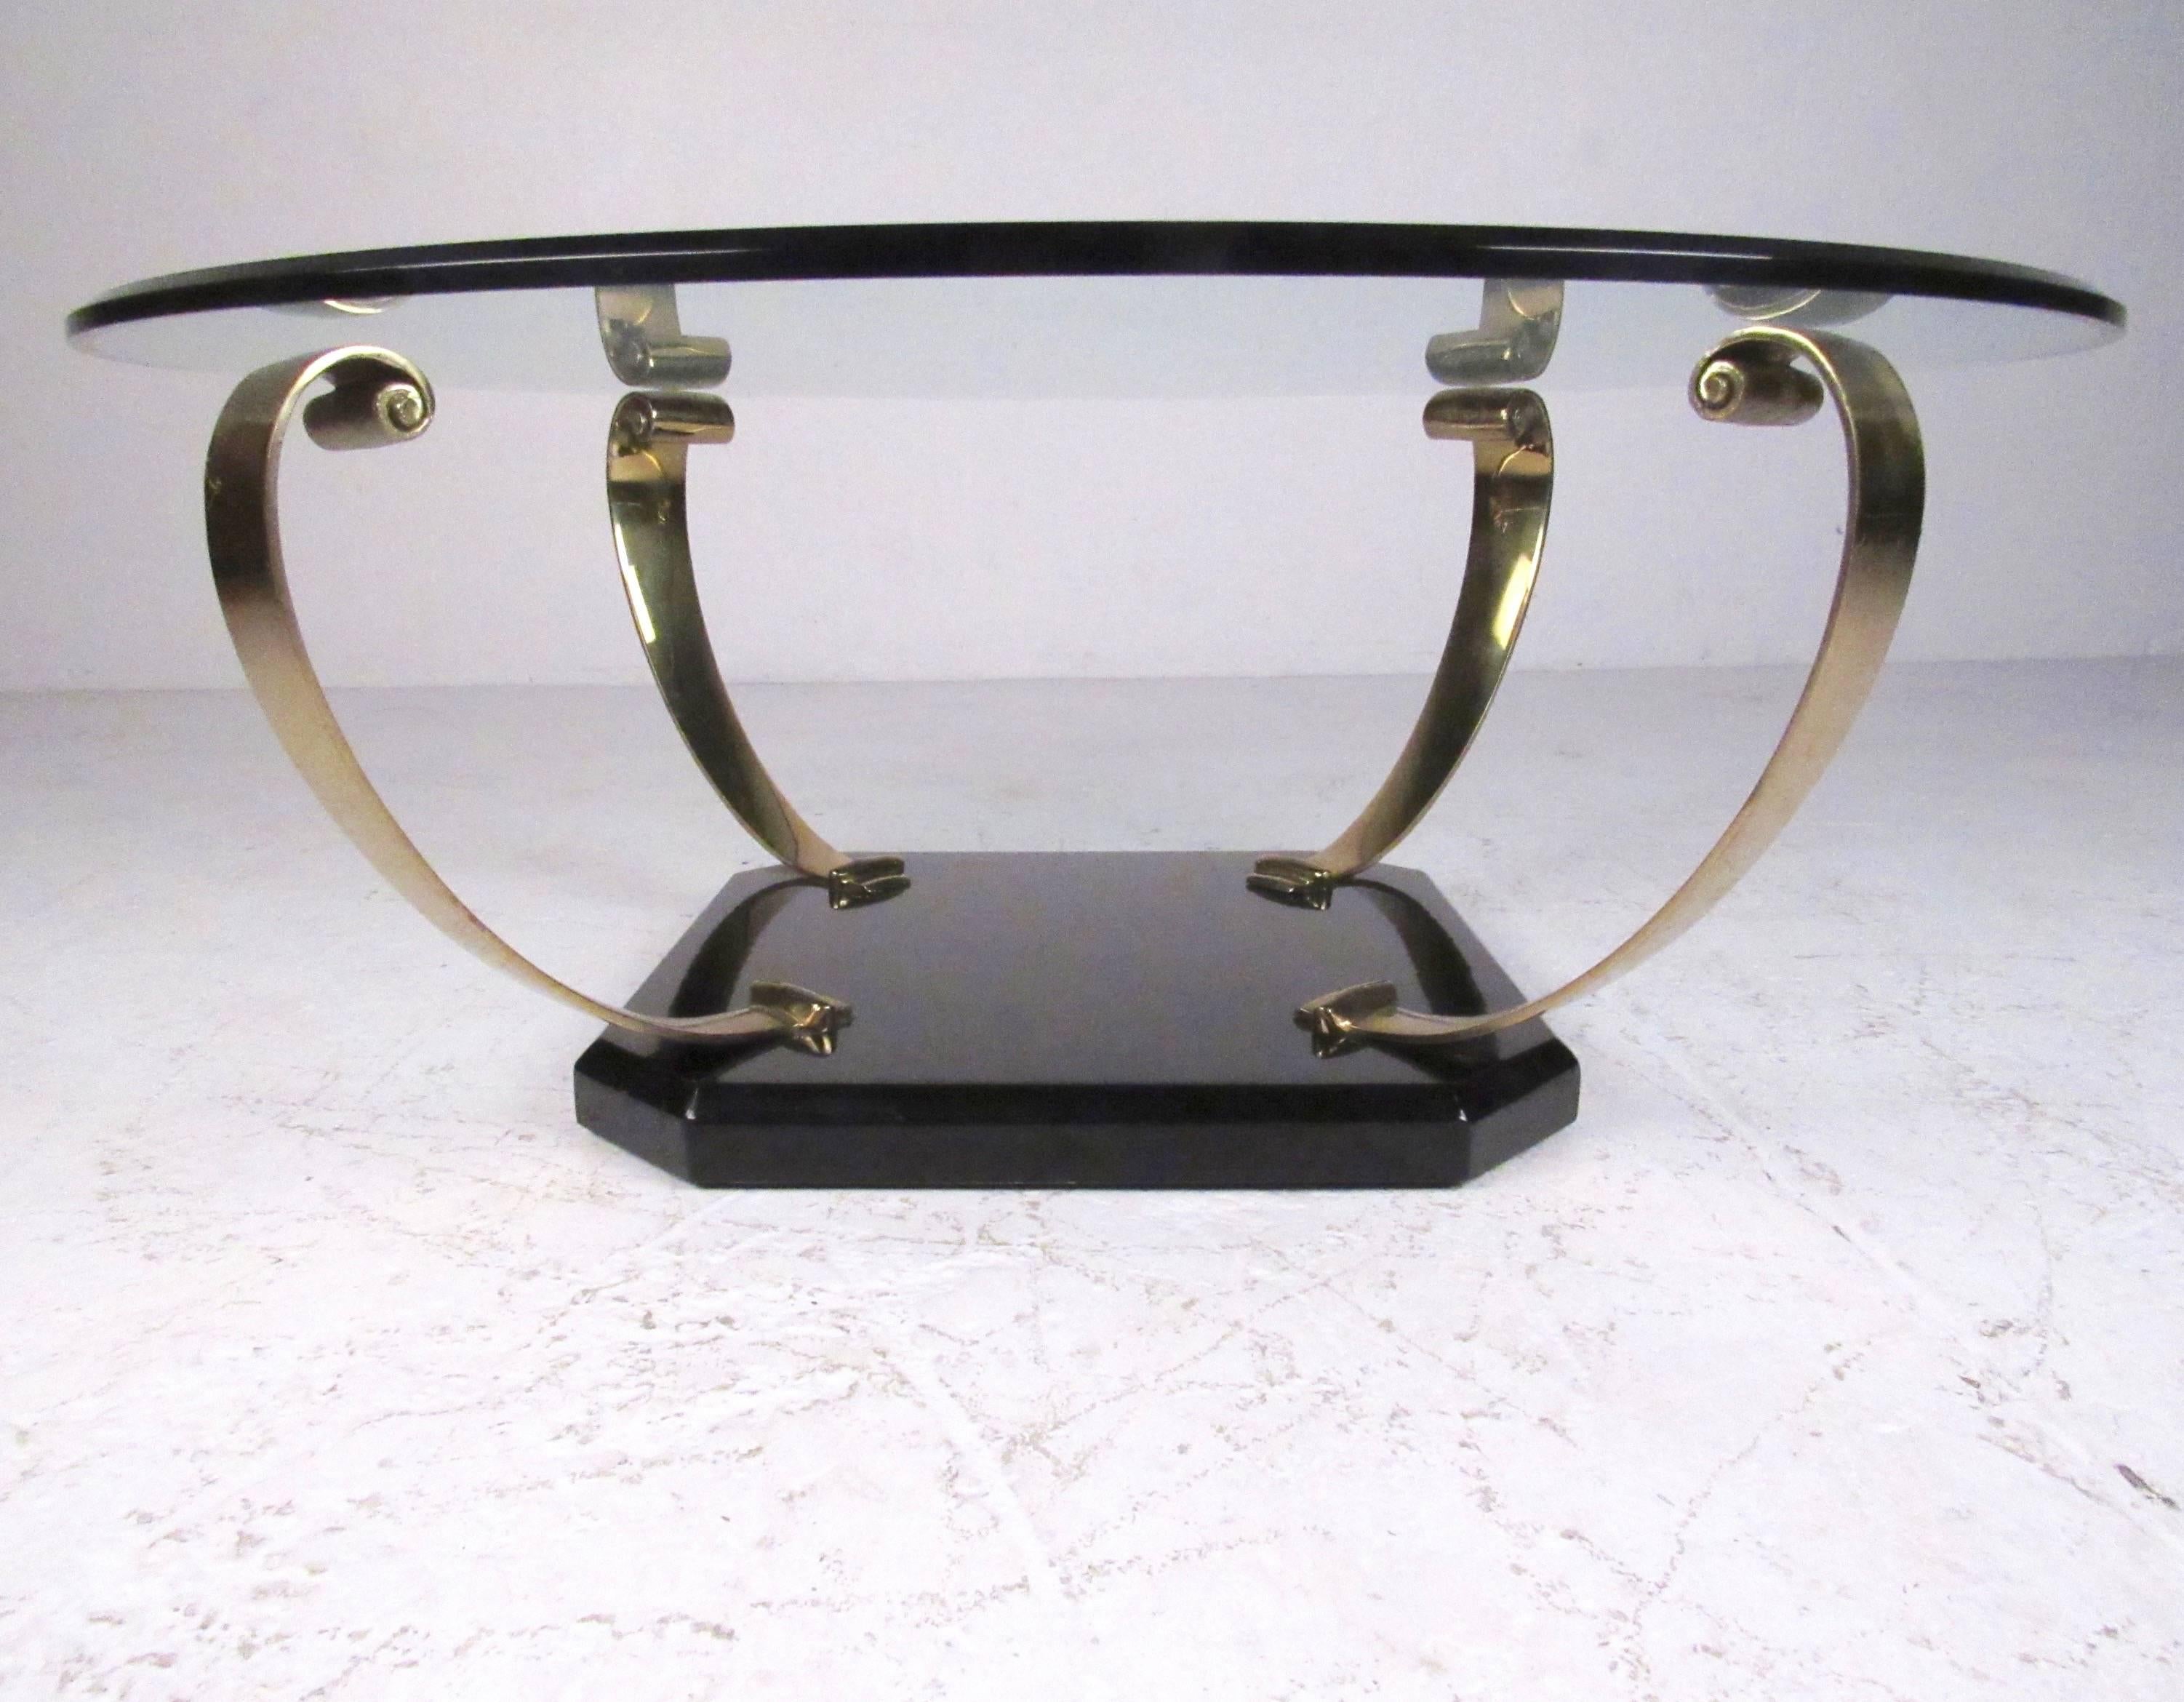 This stylish vintage coffee table features scrolled brass arms mounted on a black lacquer base with a bevelled glass top. Impressive Regency style makes a striking addition to home or business, please confirm item location (NY or NJ).